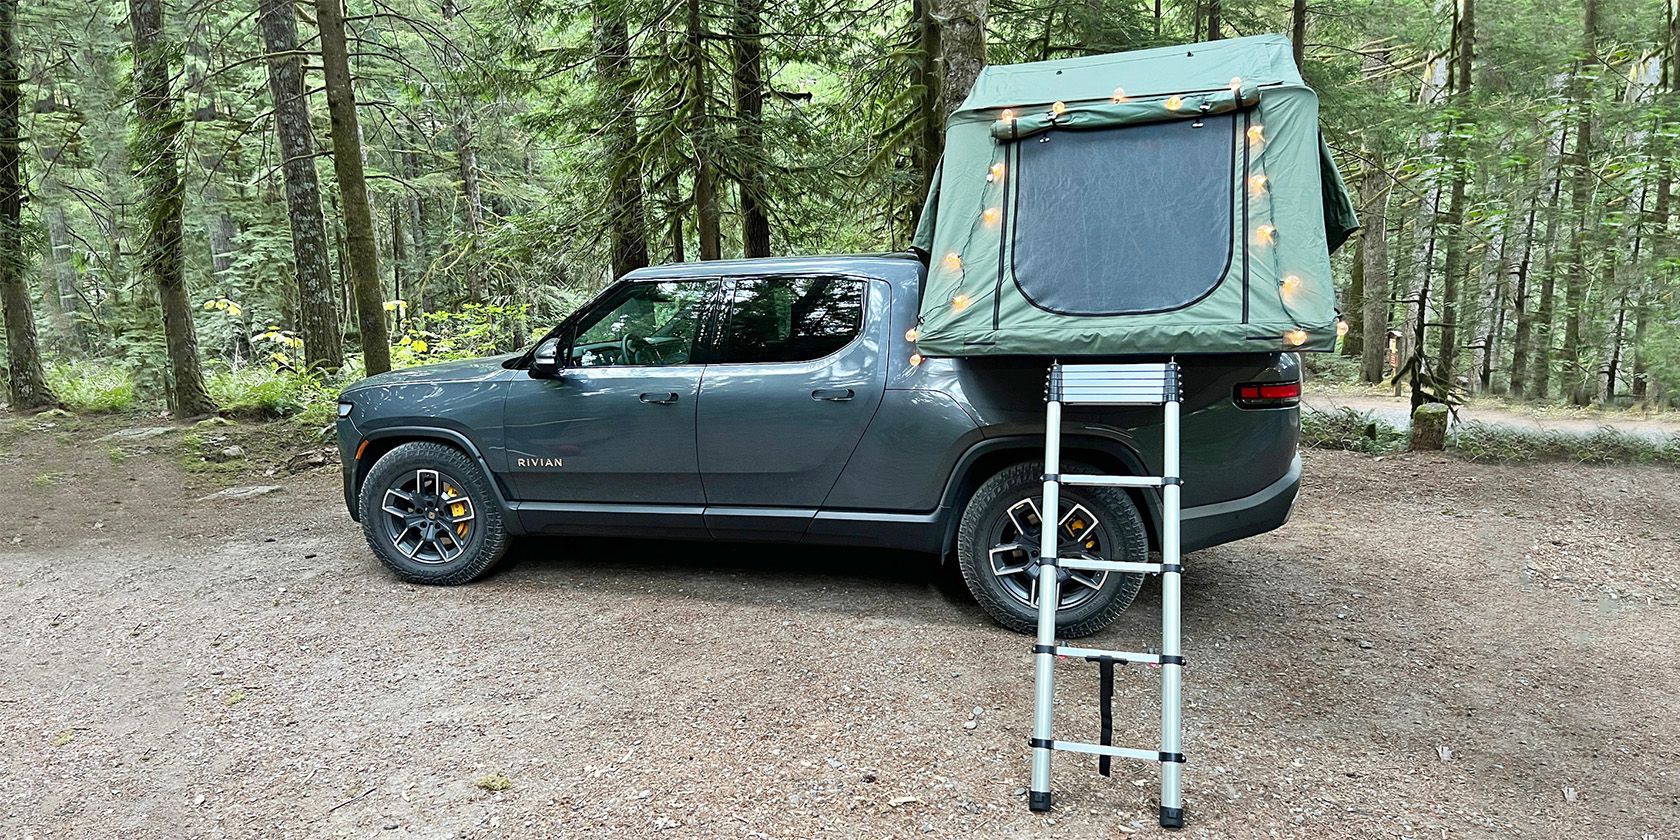 What Is Rivian Camp Mode and How Does It Work?